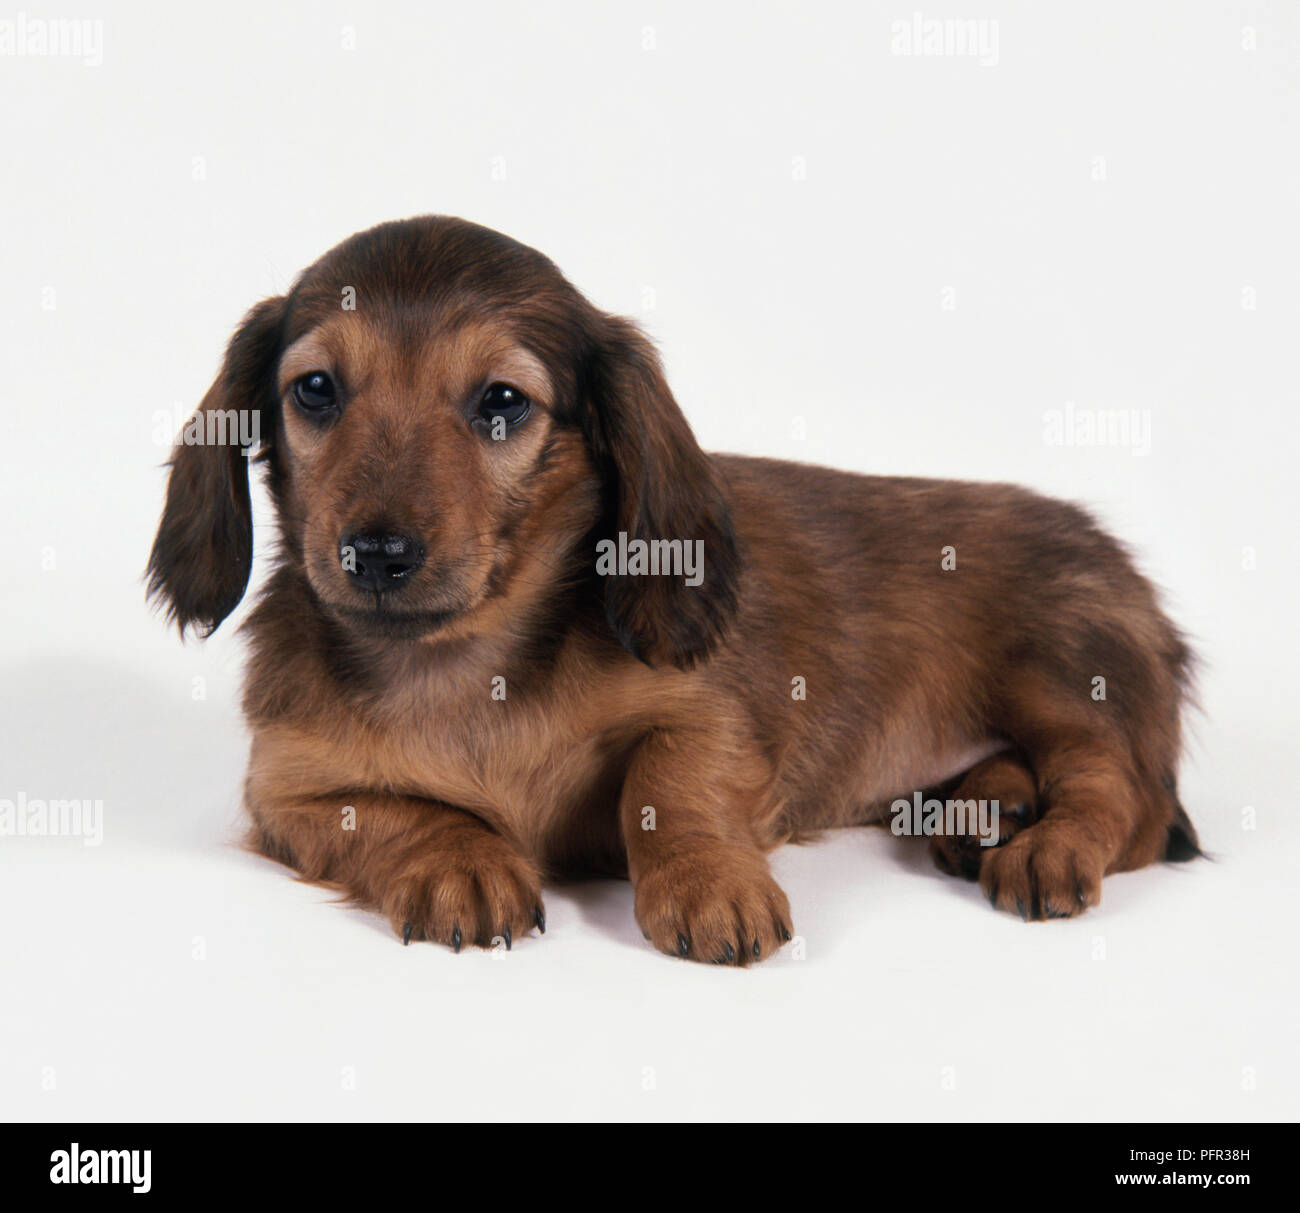 Red Long Haired Dachshund puppy lying down Stock Photo - Alamy